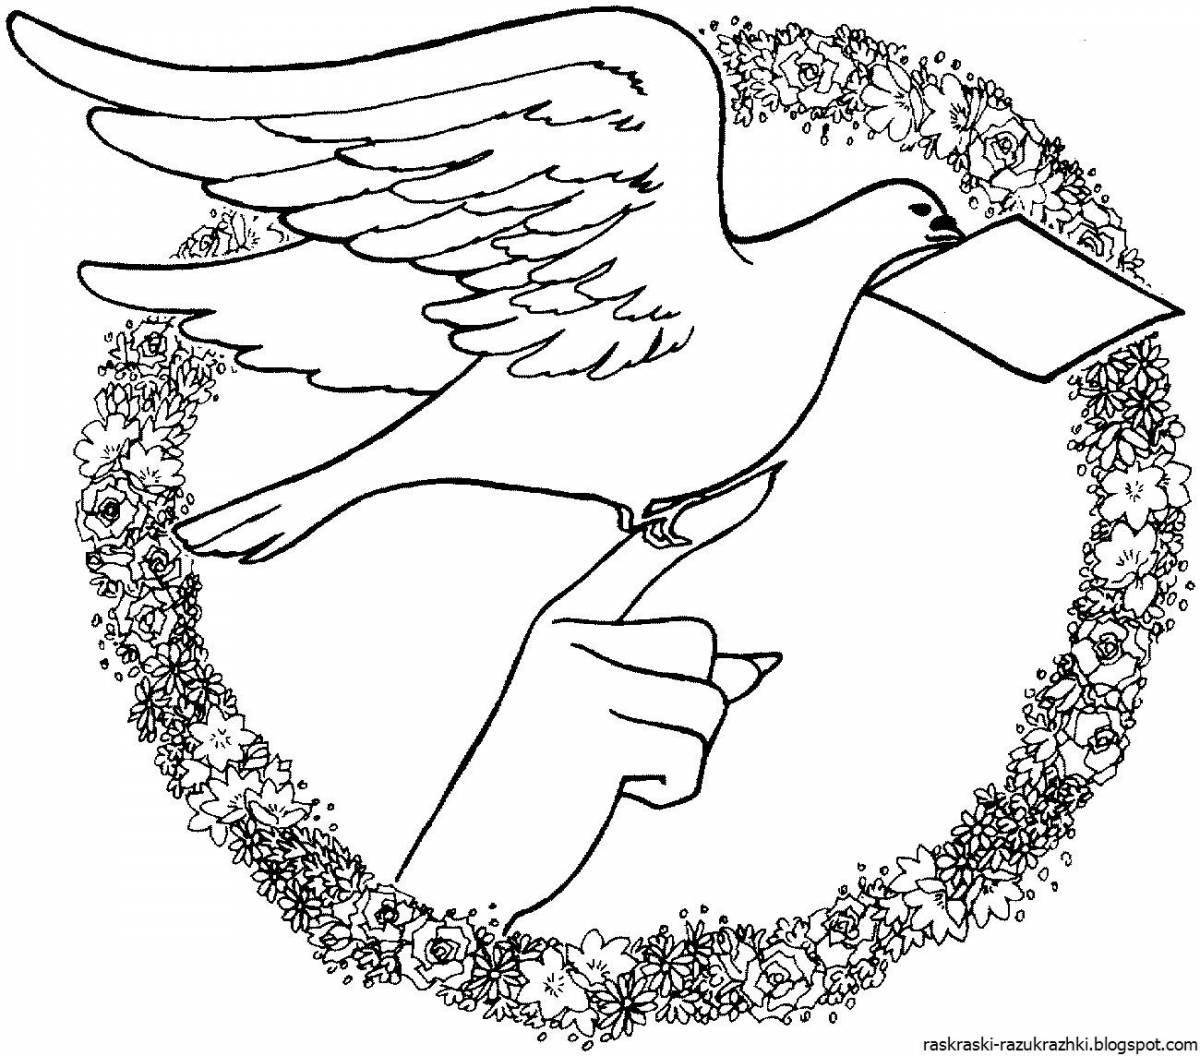 Sparkling Dove of Peace coloring book for kids